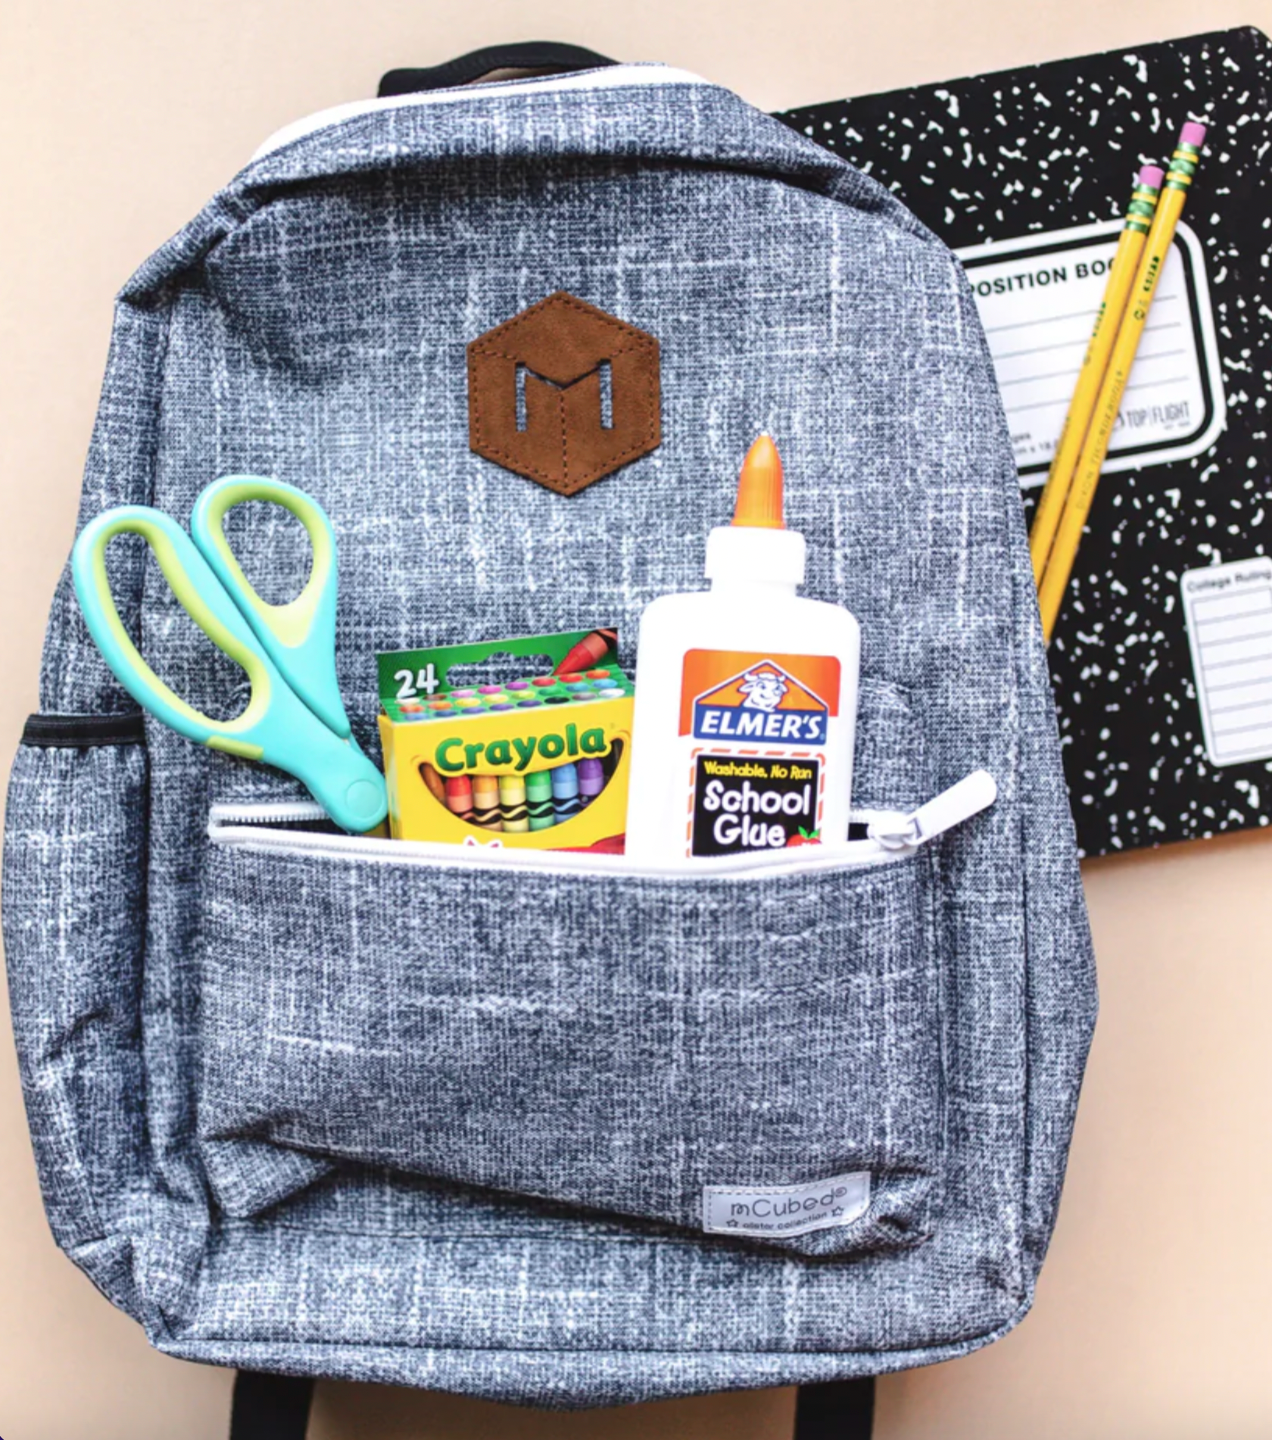 How to sew a stylish school backpack easily - diy backpack! - YouTube